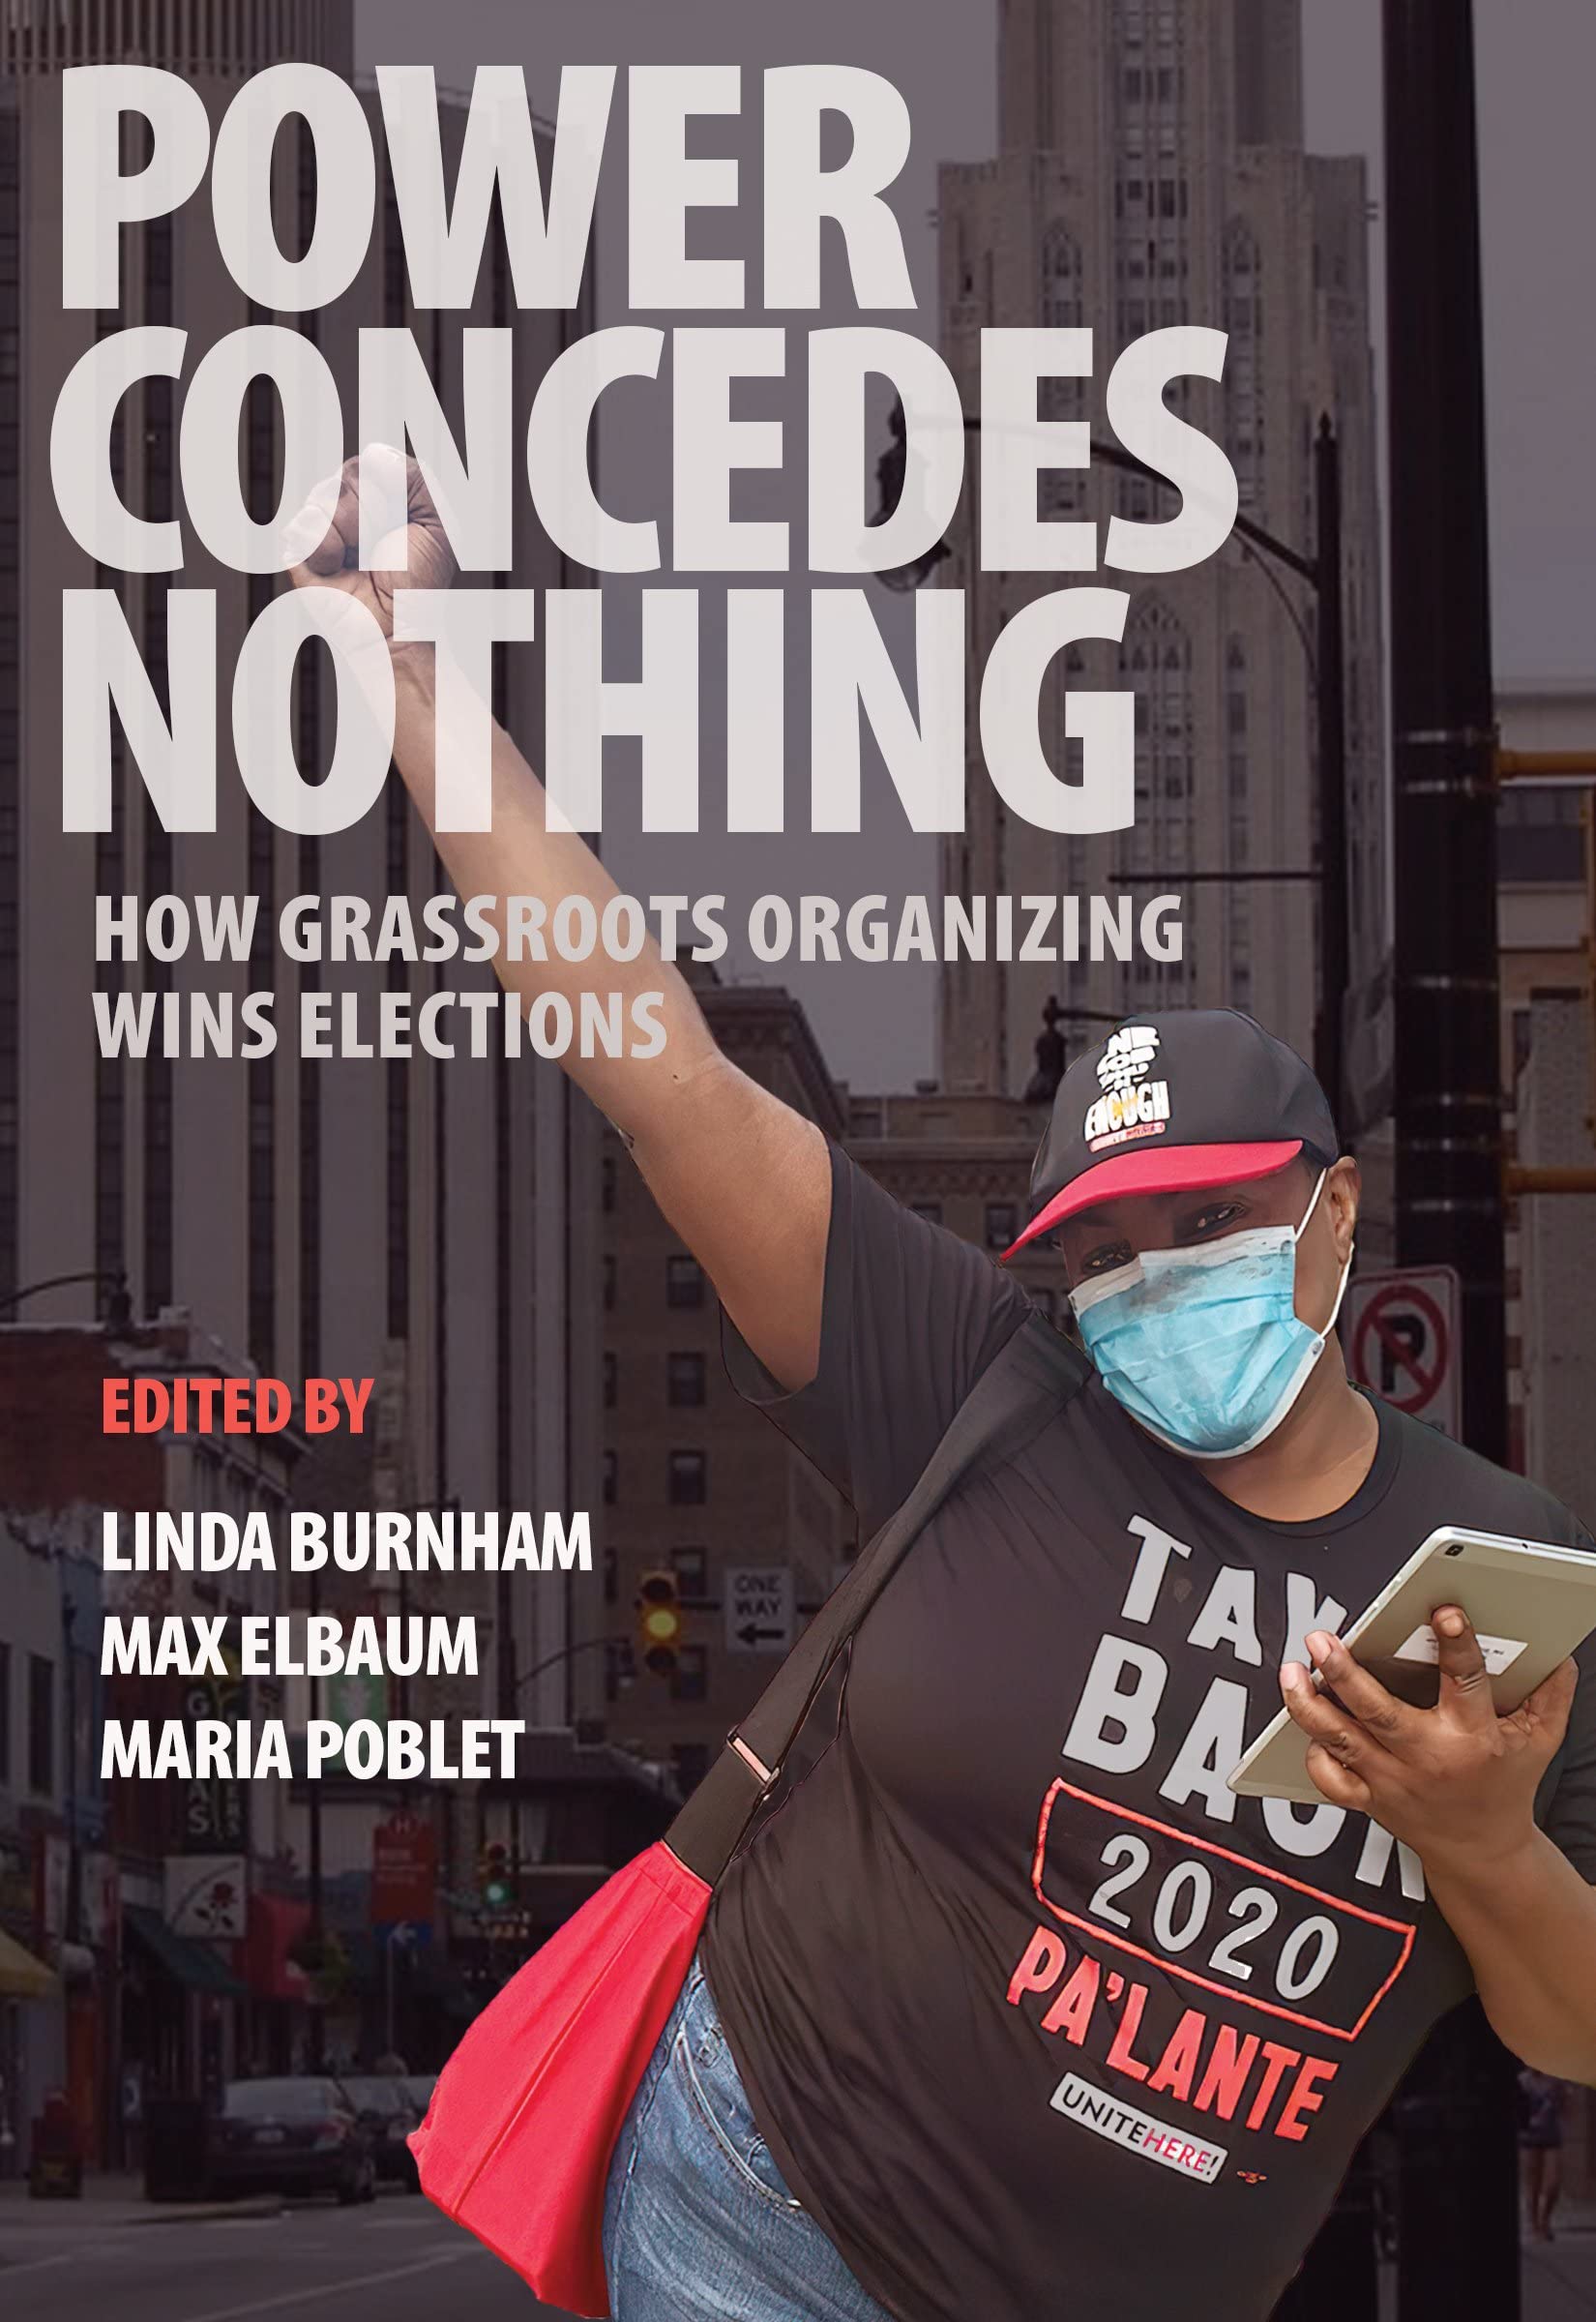 Power Concedes Nothing book cover